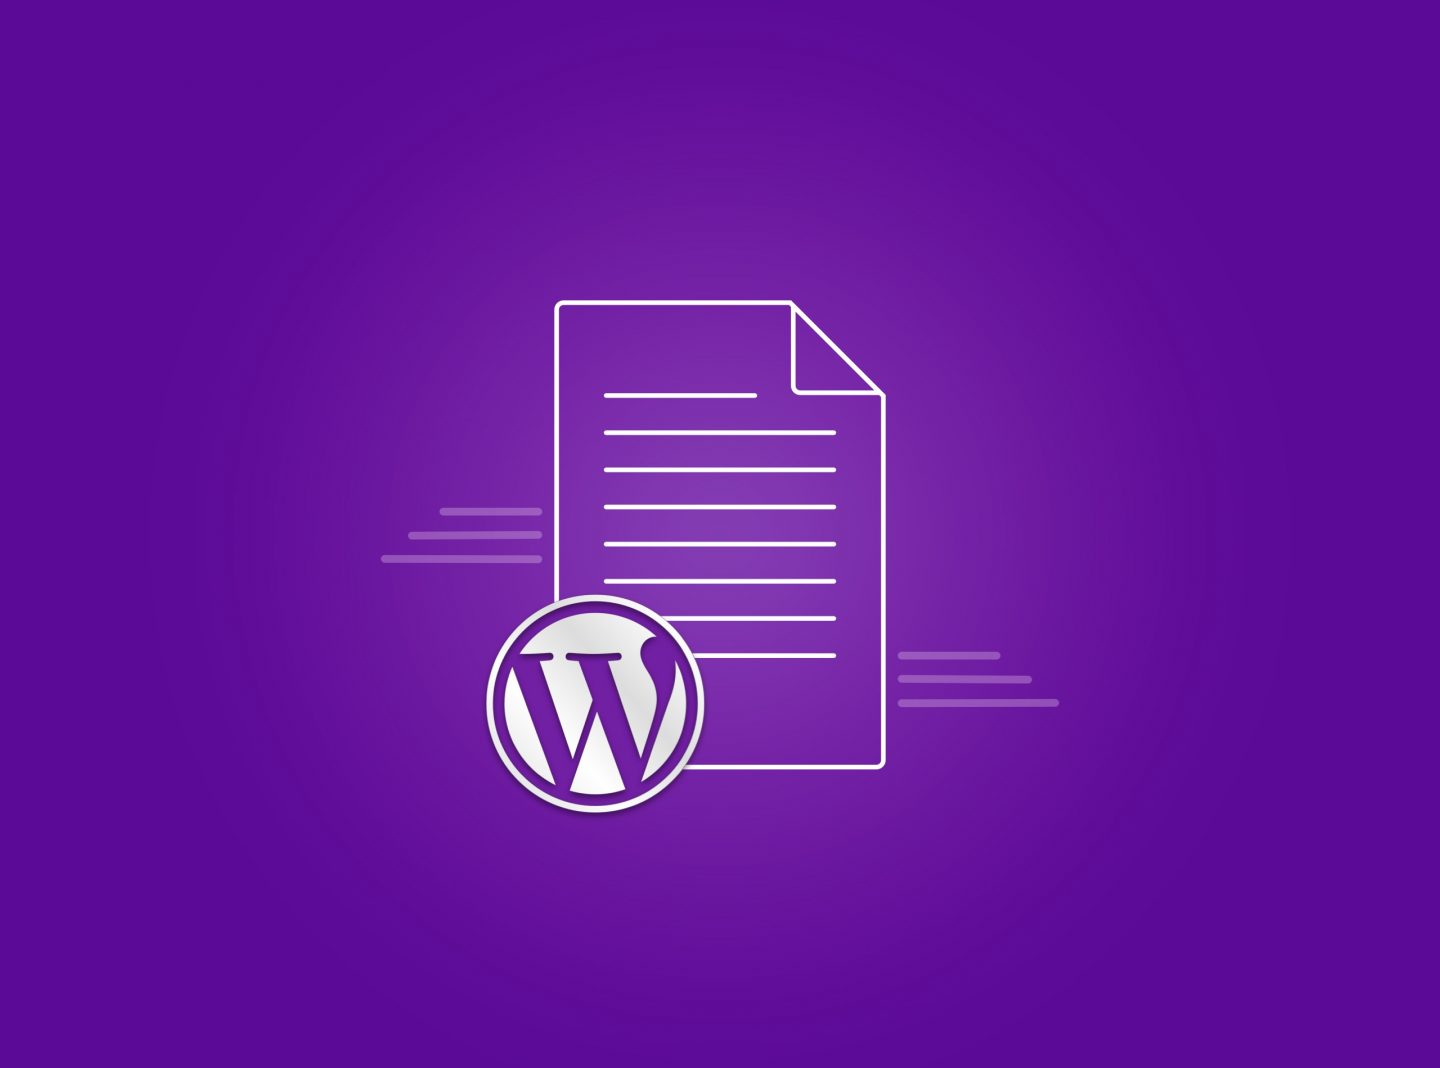 How to start with WordPress: The ultimate guide for beginners